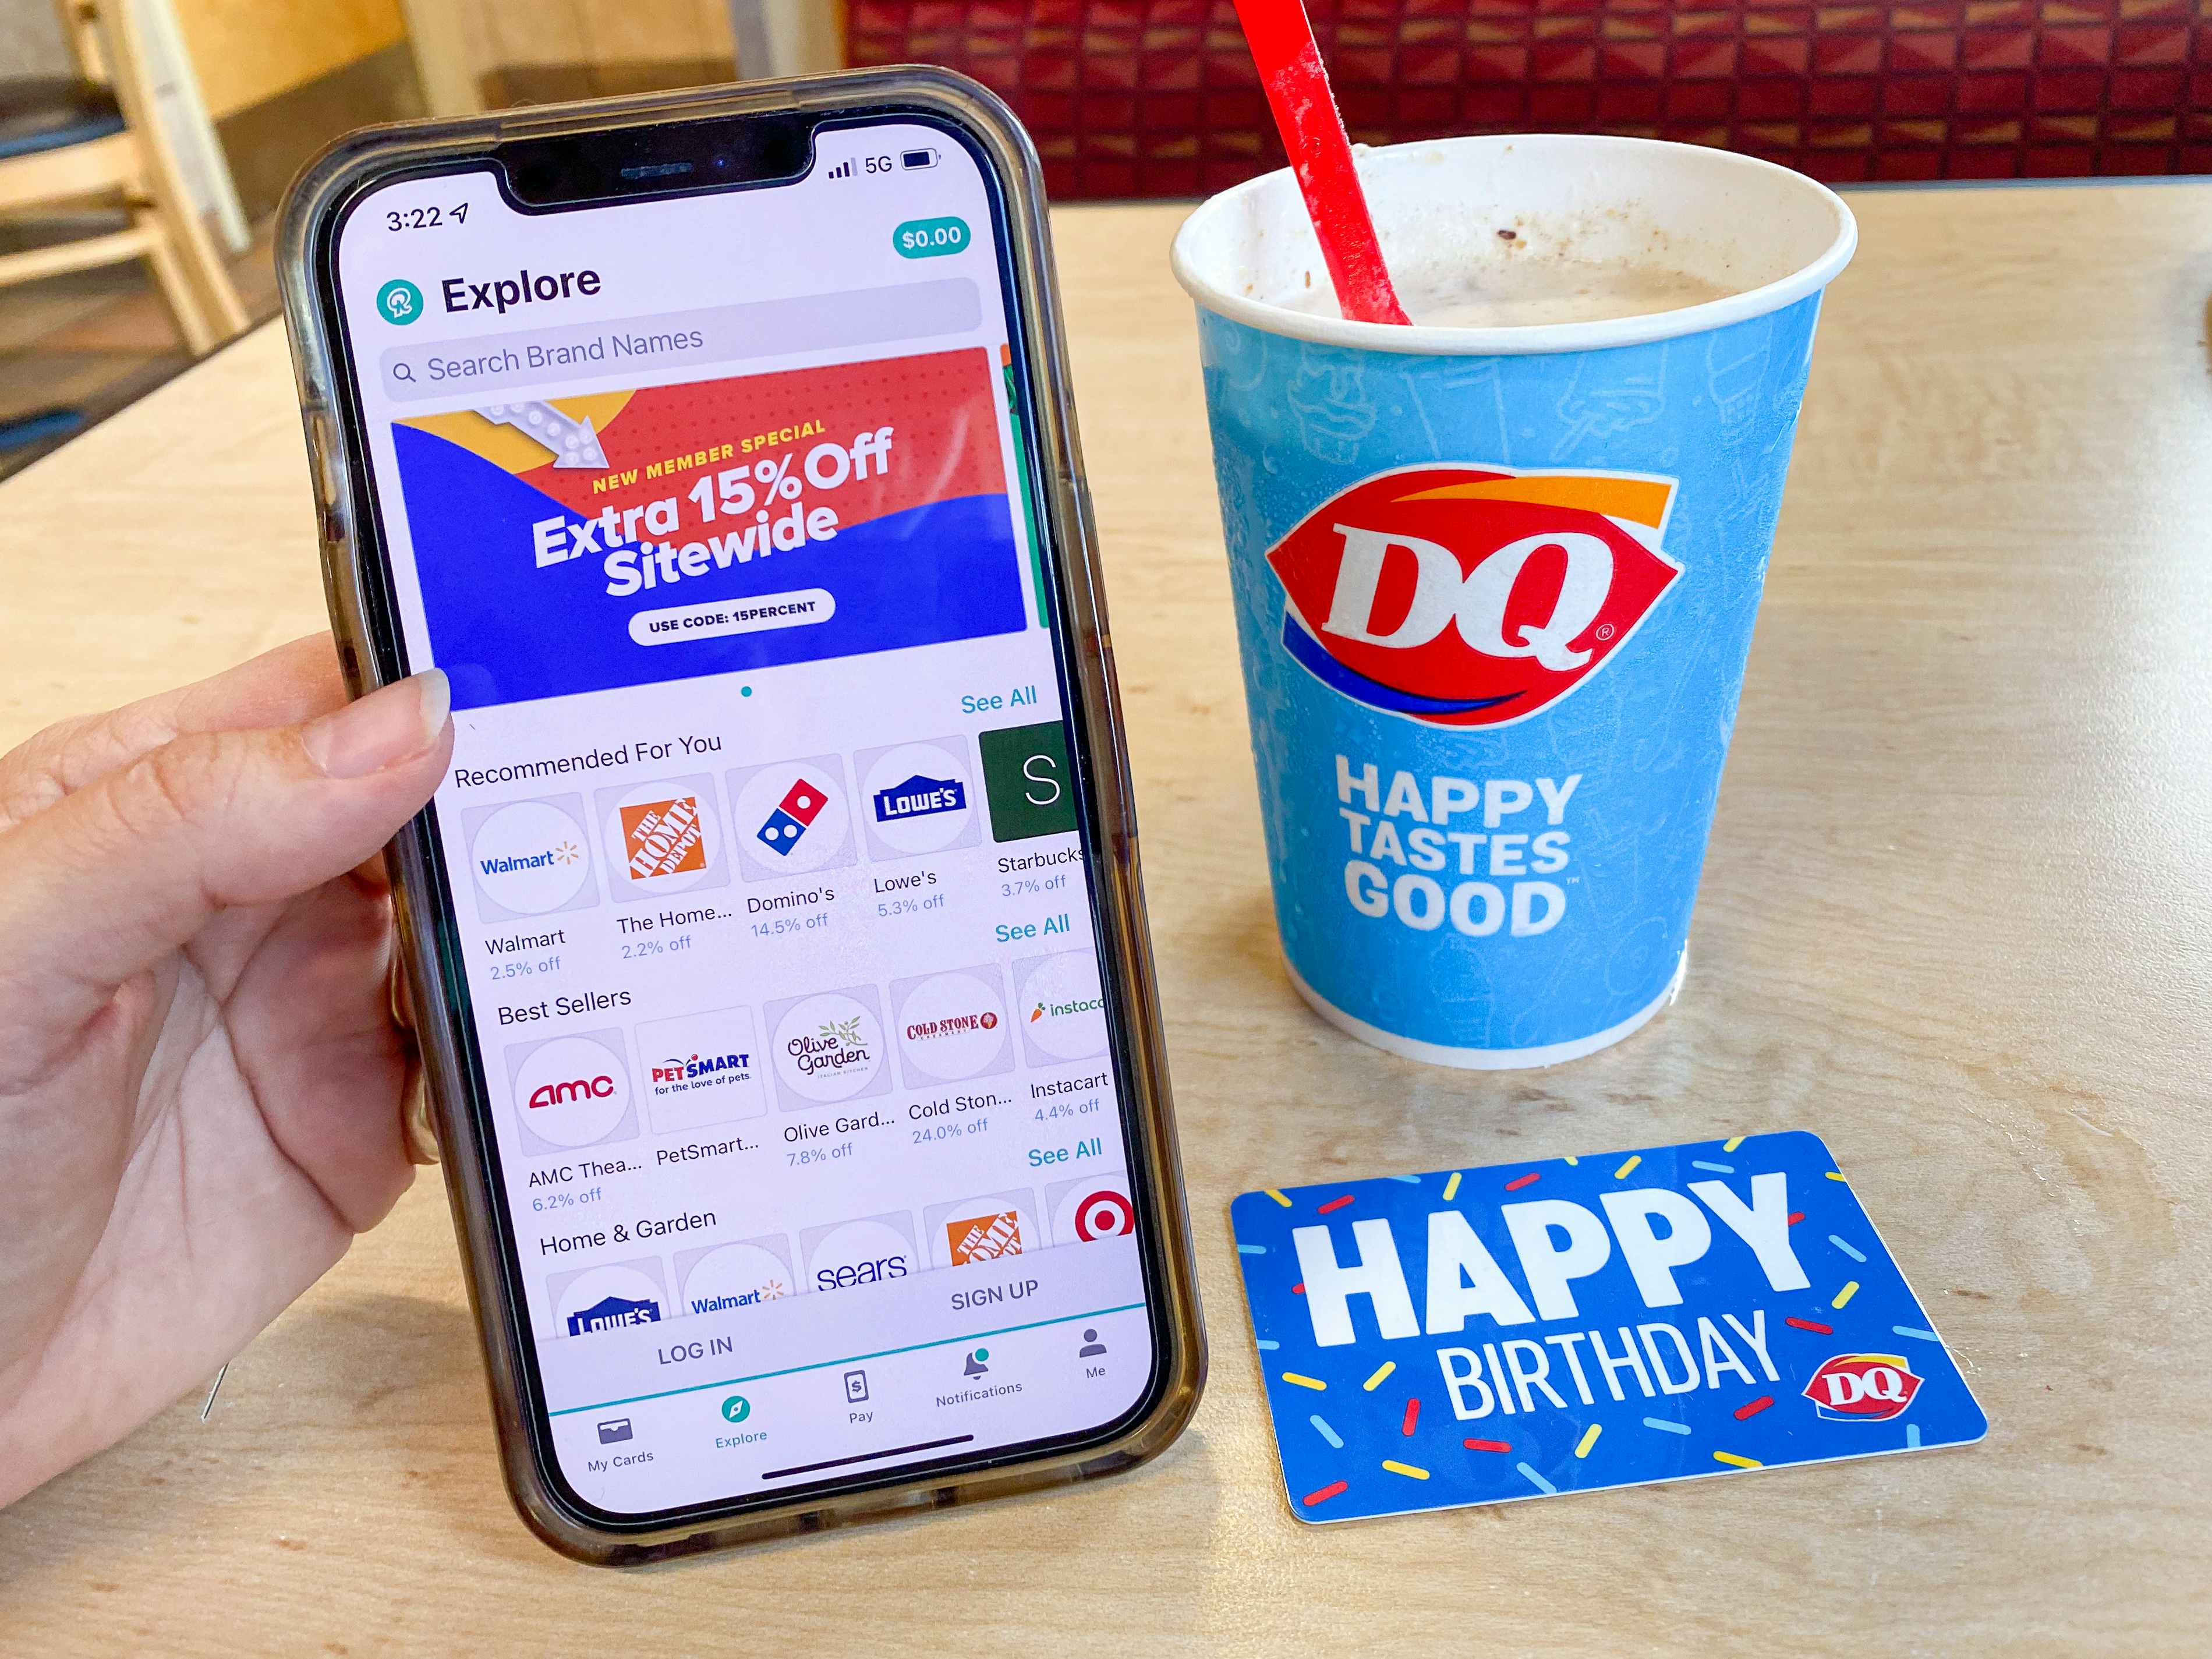 A person's hand holding a cell phone displaying the Raise.com app next to a Dairy Queen gift card and Blizzard cup sitting on a table at Dairy Queen.